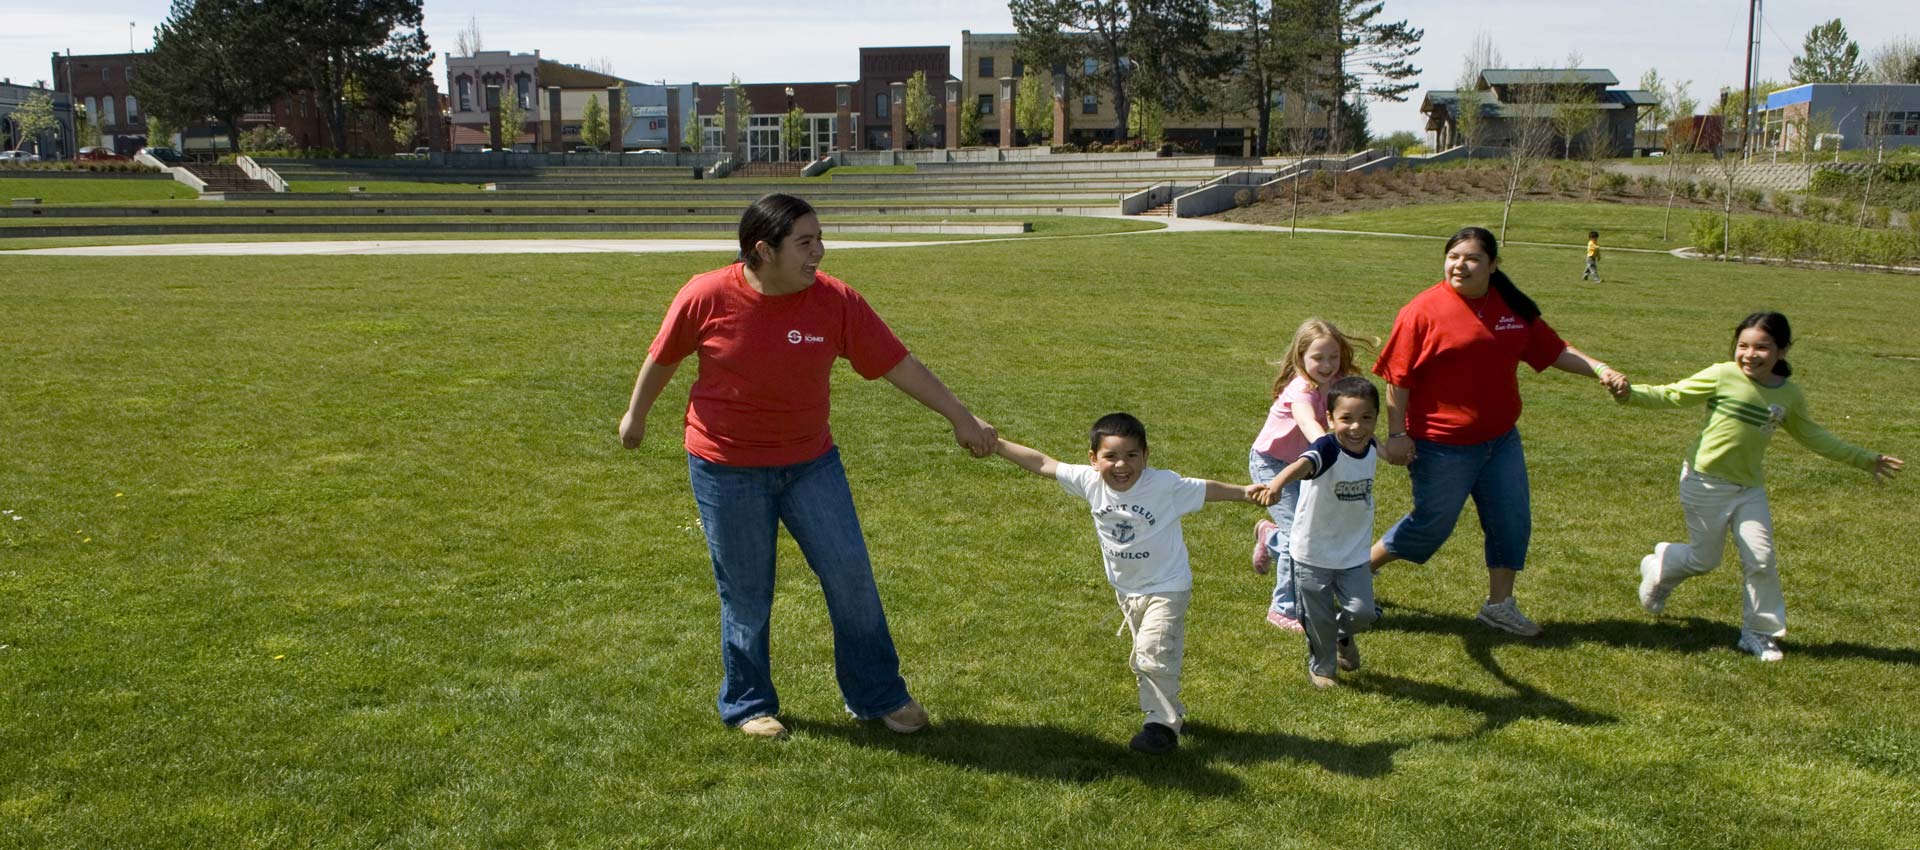 Group of youth with adults laughing and playing outside